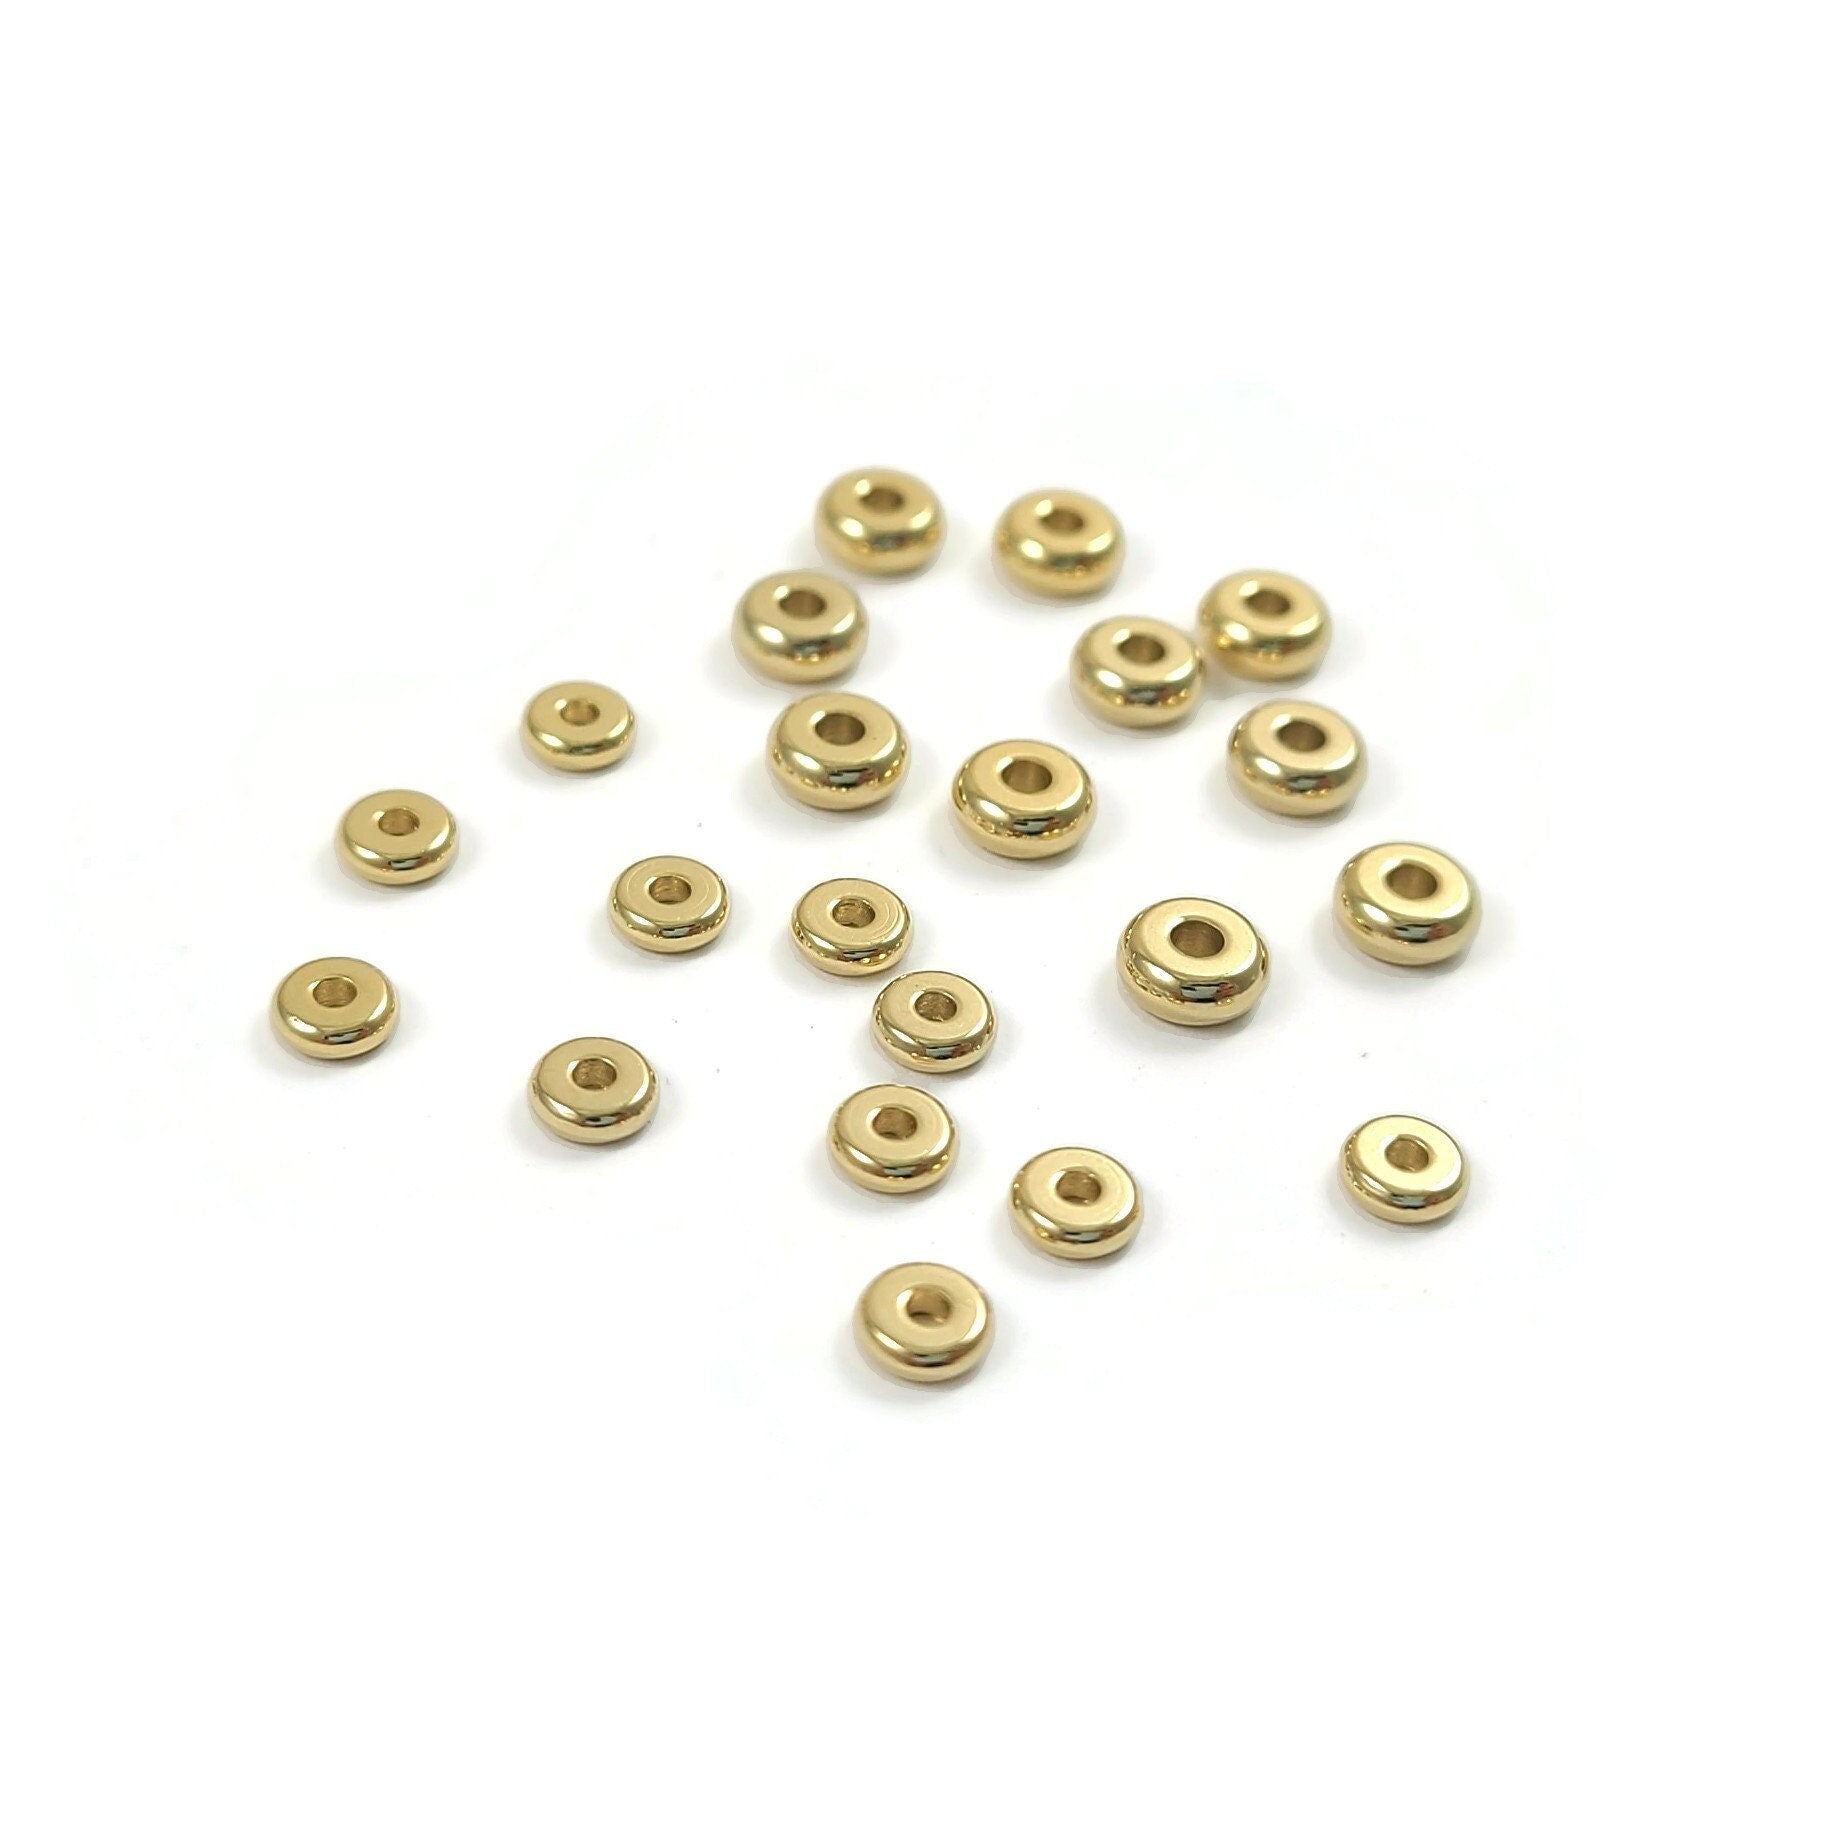 18K gold spacer beads, 4mm, 5mm, Rondelle flat round beads, Stainless steel jewelry making beads